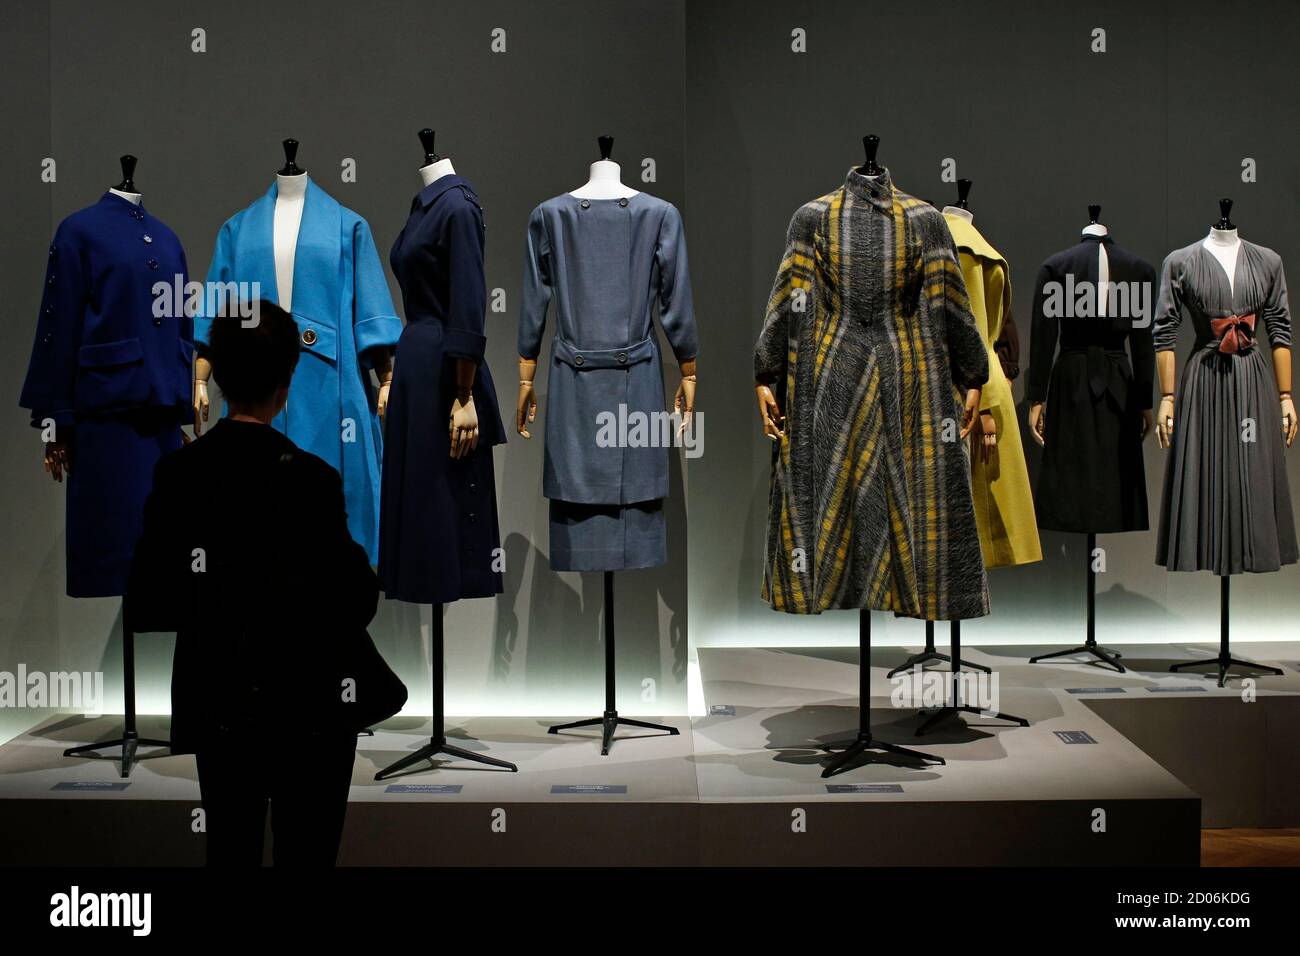 A visitor looks at vintage dresses by designers Marcel Rochas,  Schiaparelli, Jeanne Lafaurie, Balenciaga, Gres, Madeleine Vramant, Jacques  Fath and Pauline Trigere presented in the exhibition "Les Annees 50, La mode  en